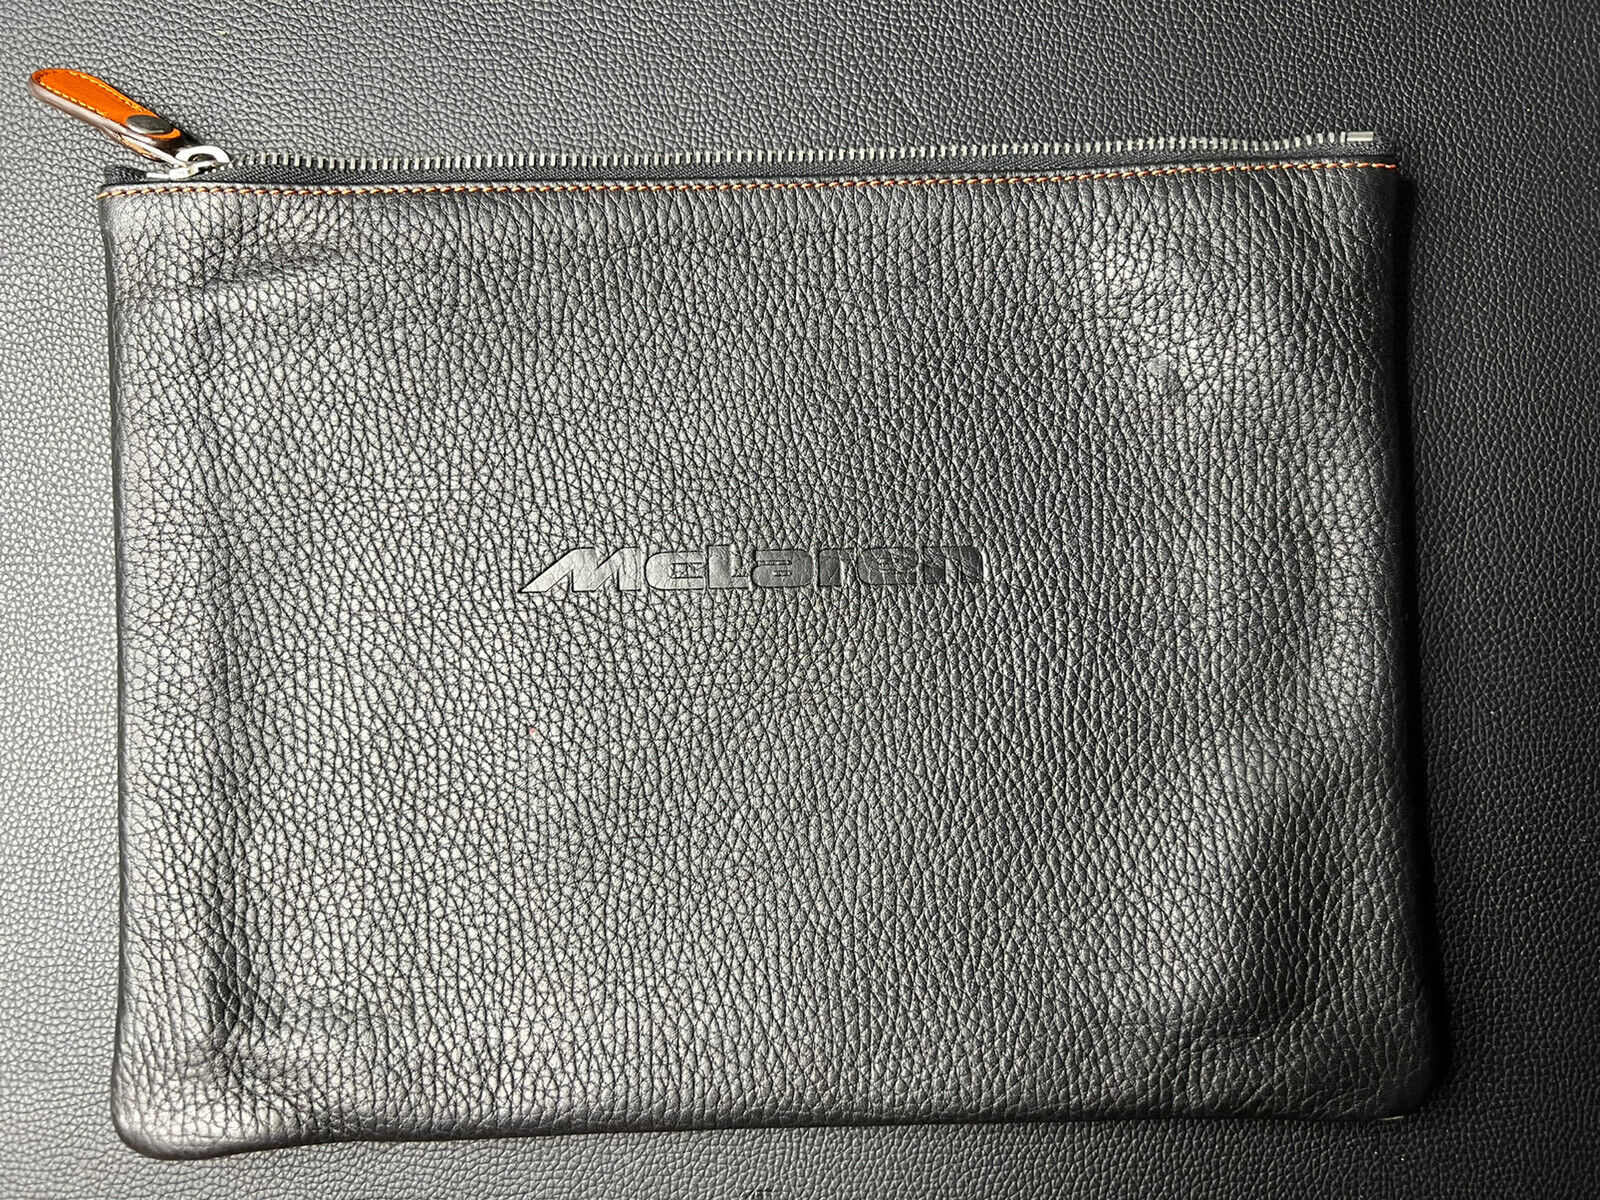 McLaren Leather owners manual holder hand made by Ghurka for McLaren 